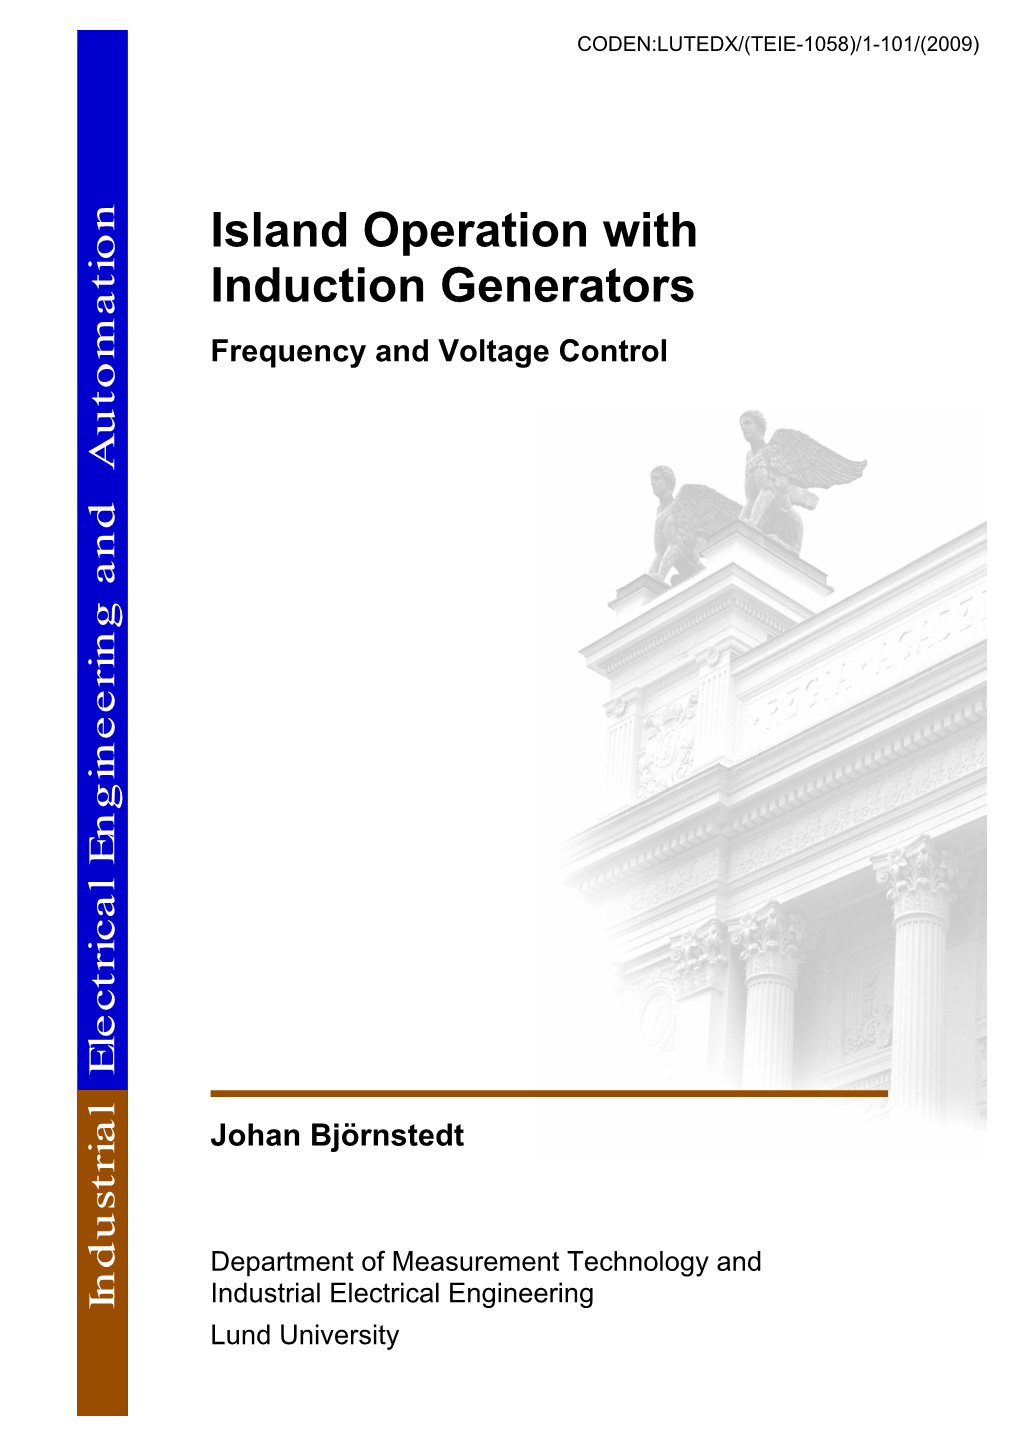 Island Operation with Induction Generators